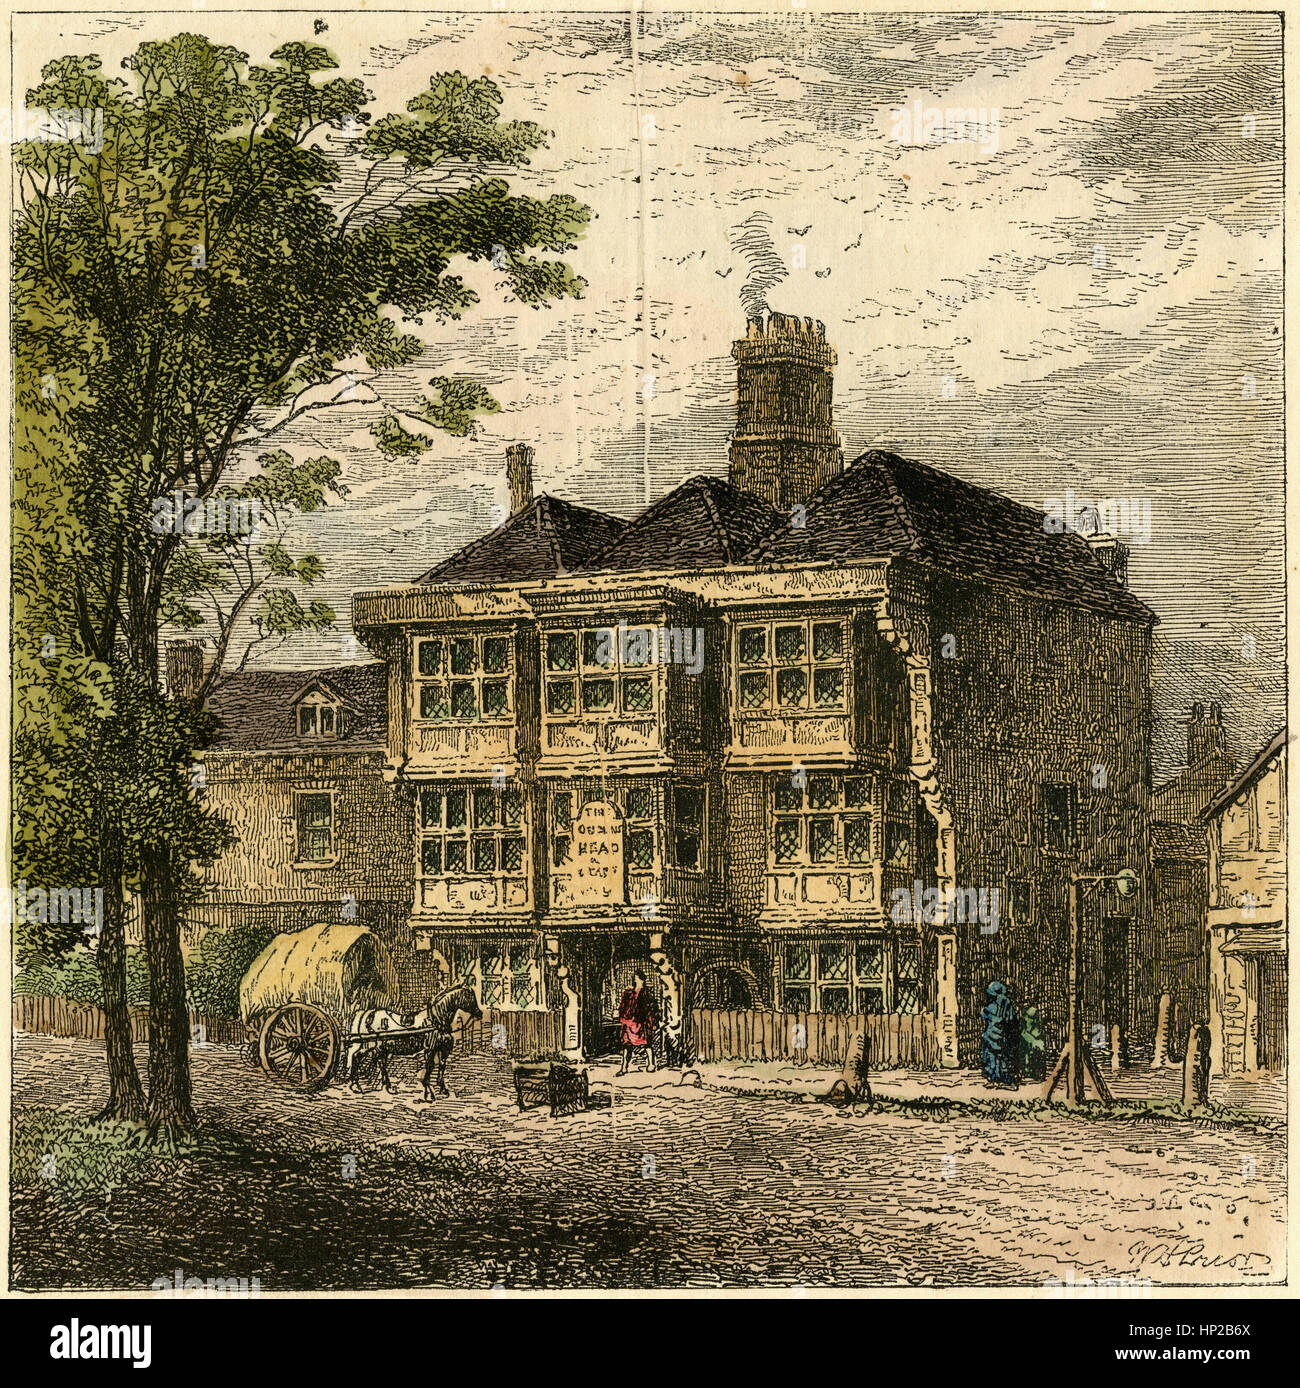 Antique c1880 engraving, The Old Queen's Head Tavern. The Queen's Head Tavern was located on Fleet Street to the east of the Temple Bar in London, England. SOURCE: ORIGINAL HAND-COLORED ENGRAVING. Stock Photo